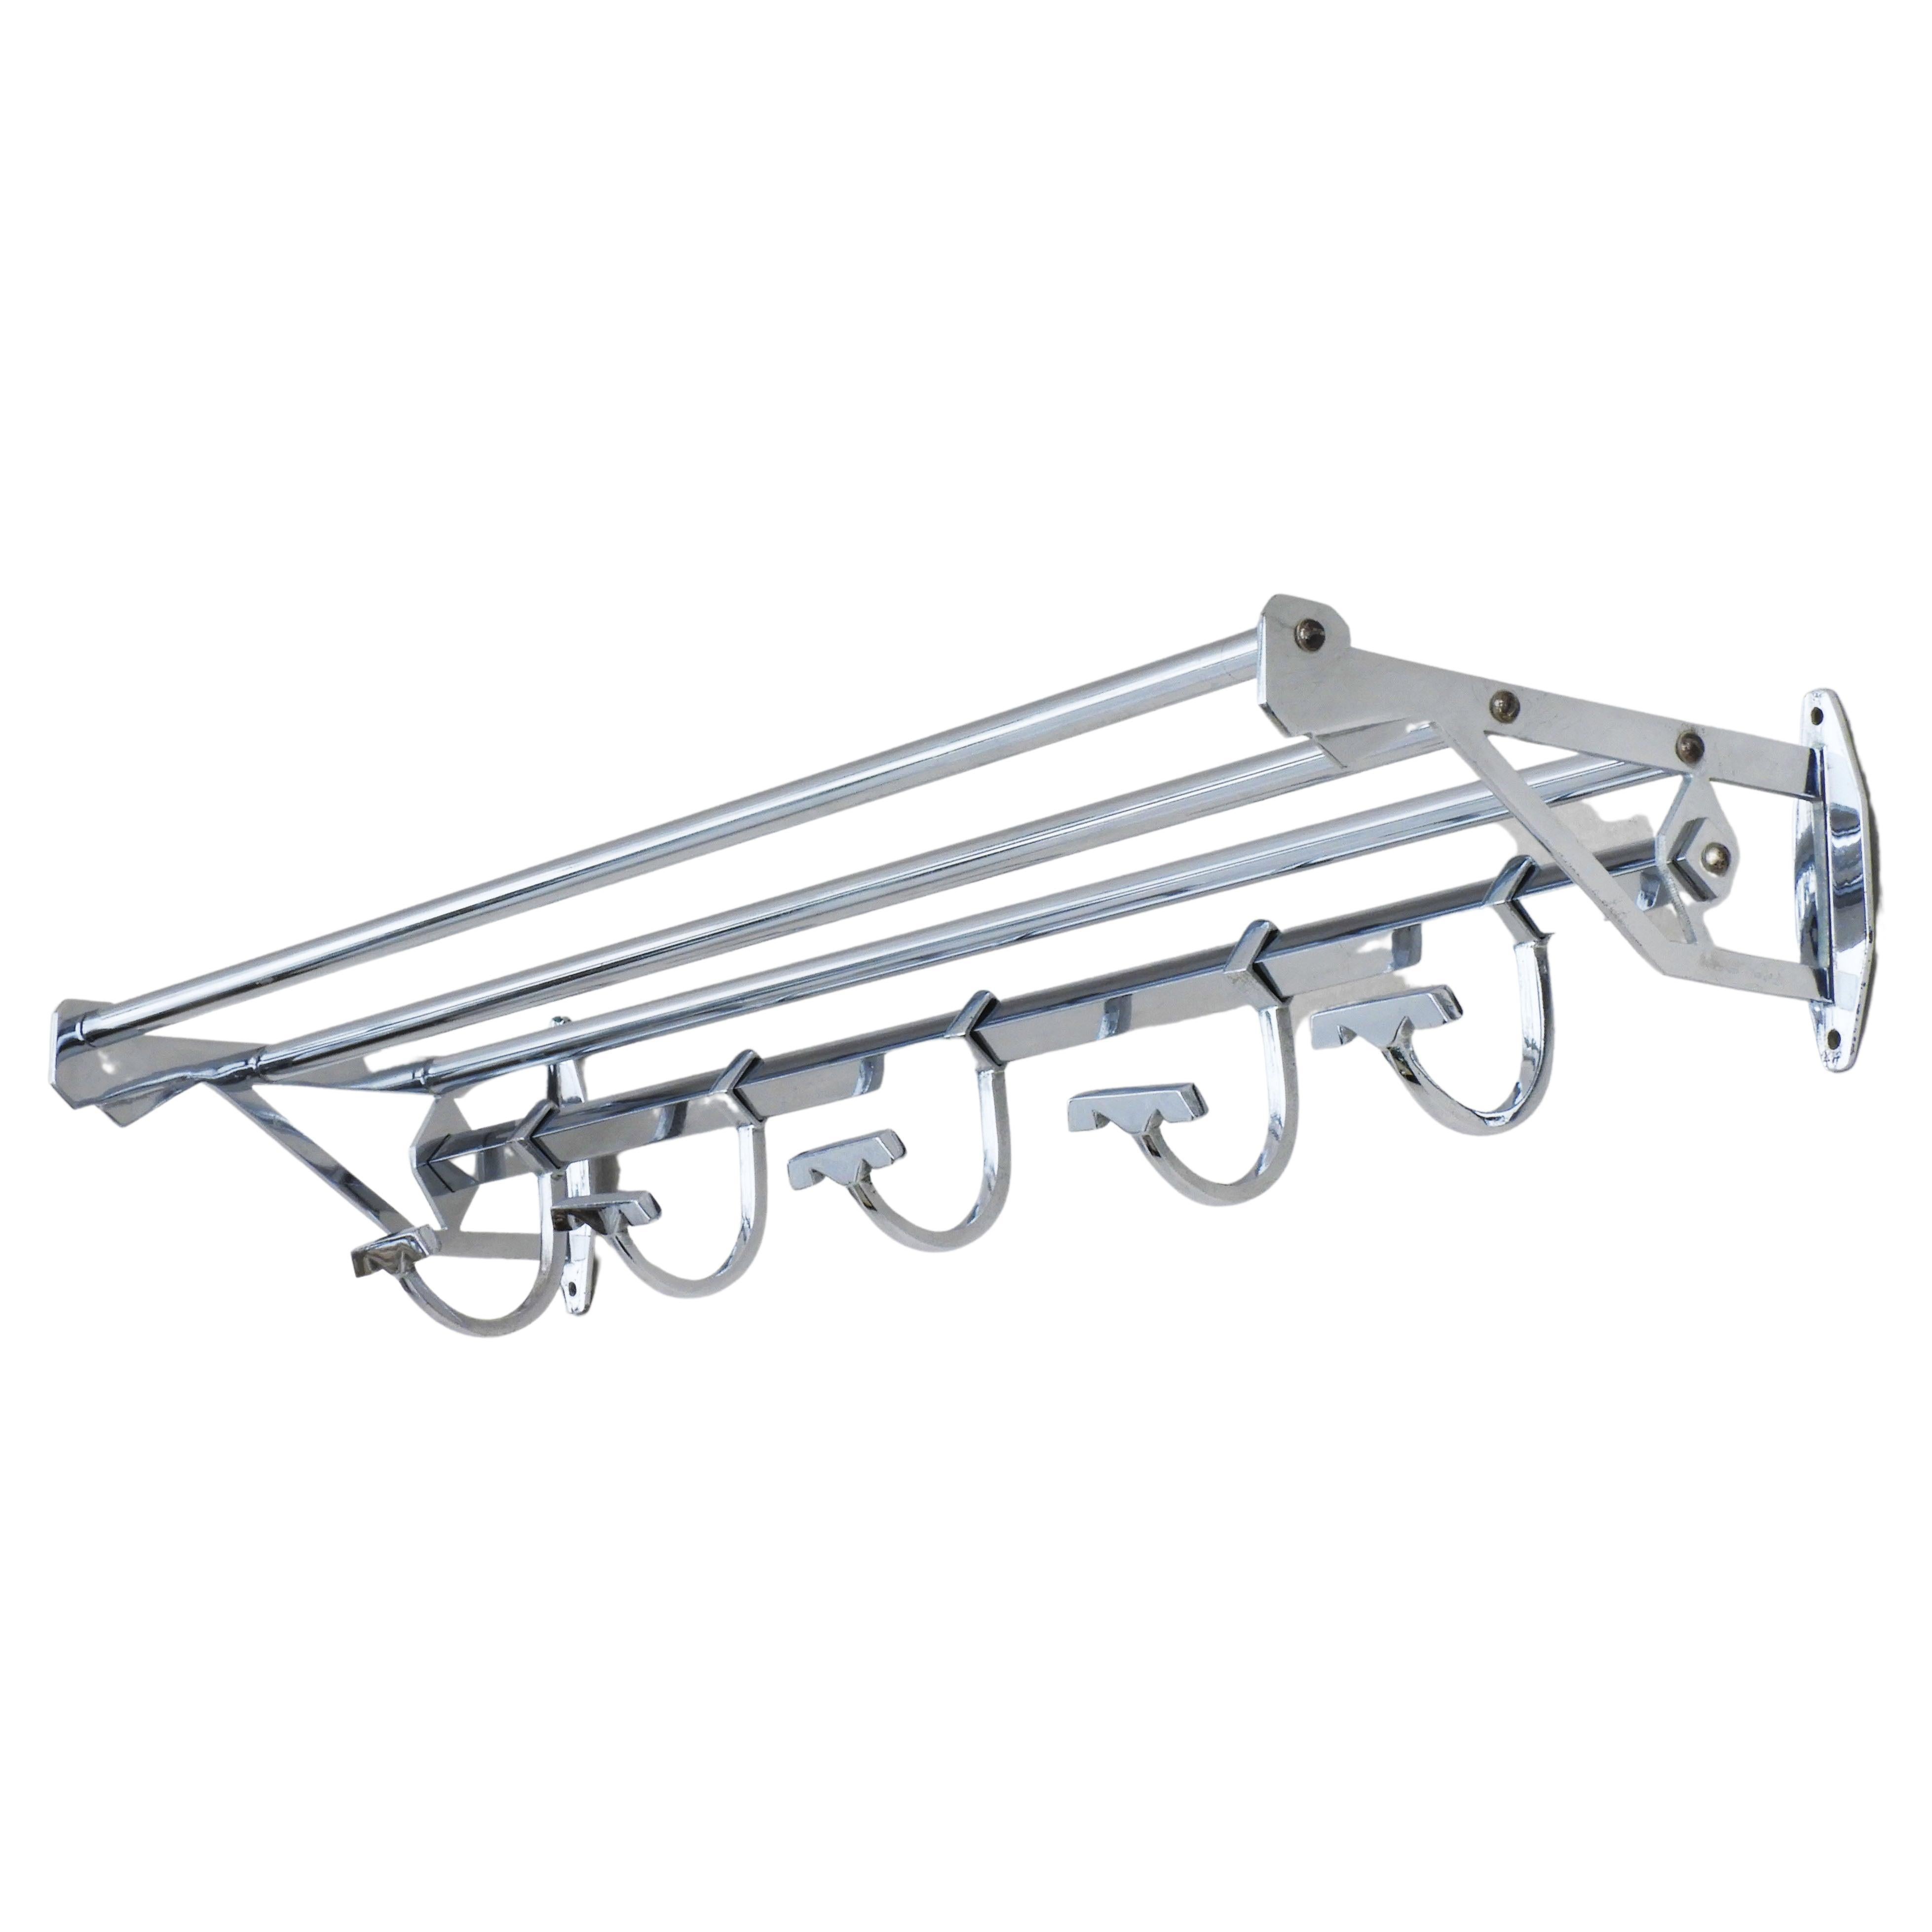 French railways chromed hat and coat rack C1950
Classic french Mid century design, both practical and stylish, with five sliding hooks and an upper railed rack for hats or parcels.  Perfect for use in either a cloakroom or bathroom. In good vintage